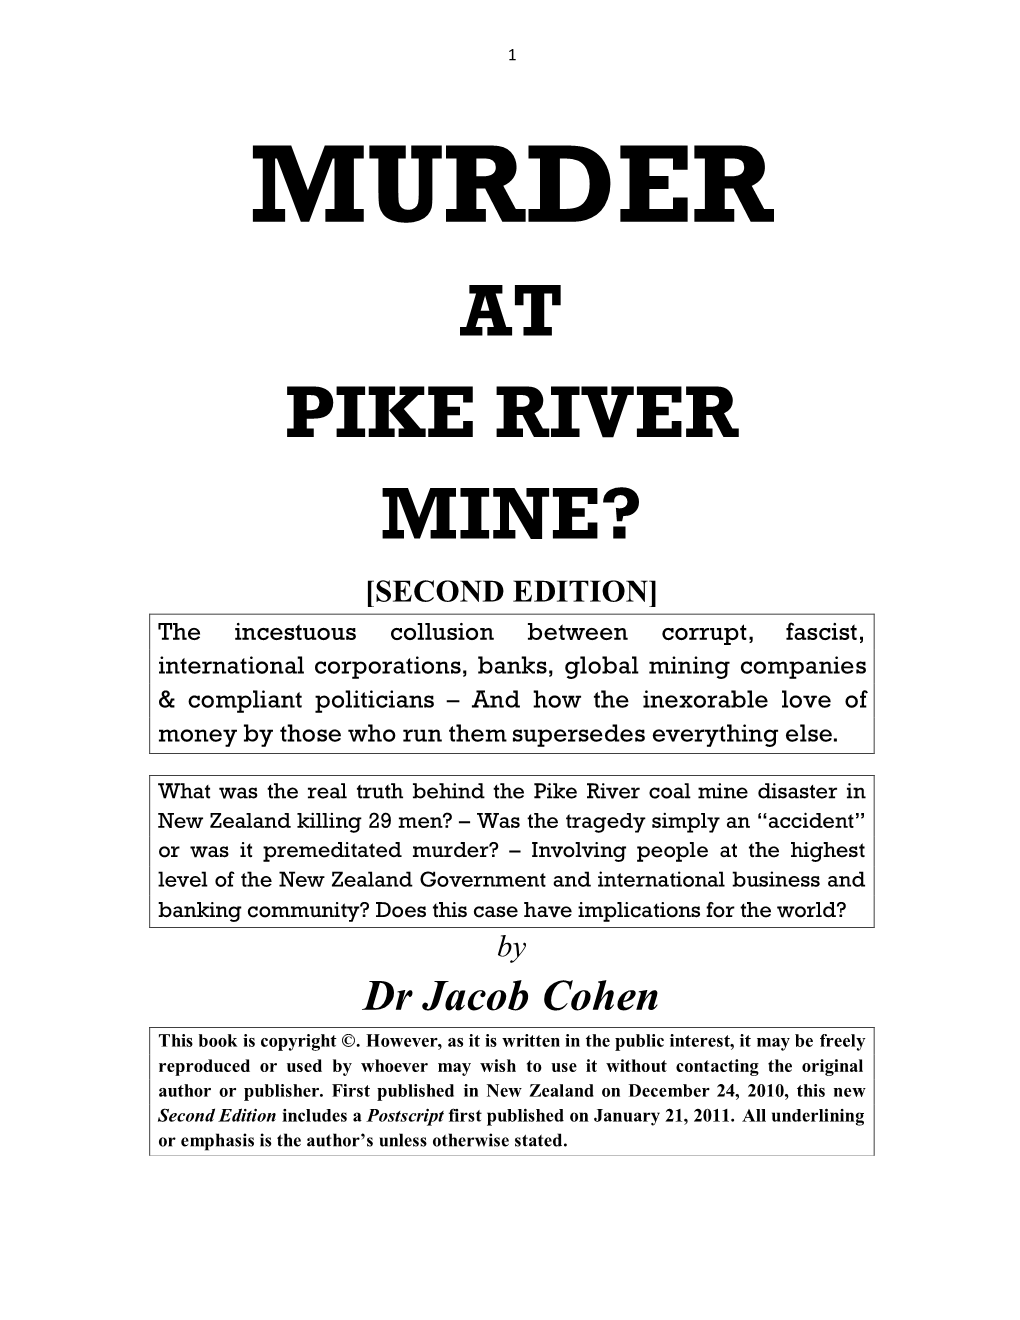 Murder at Pike River